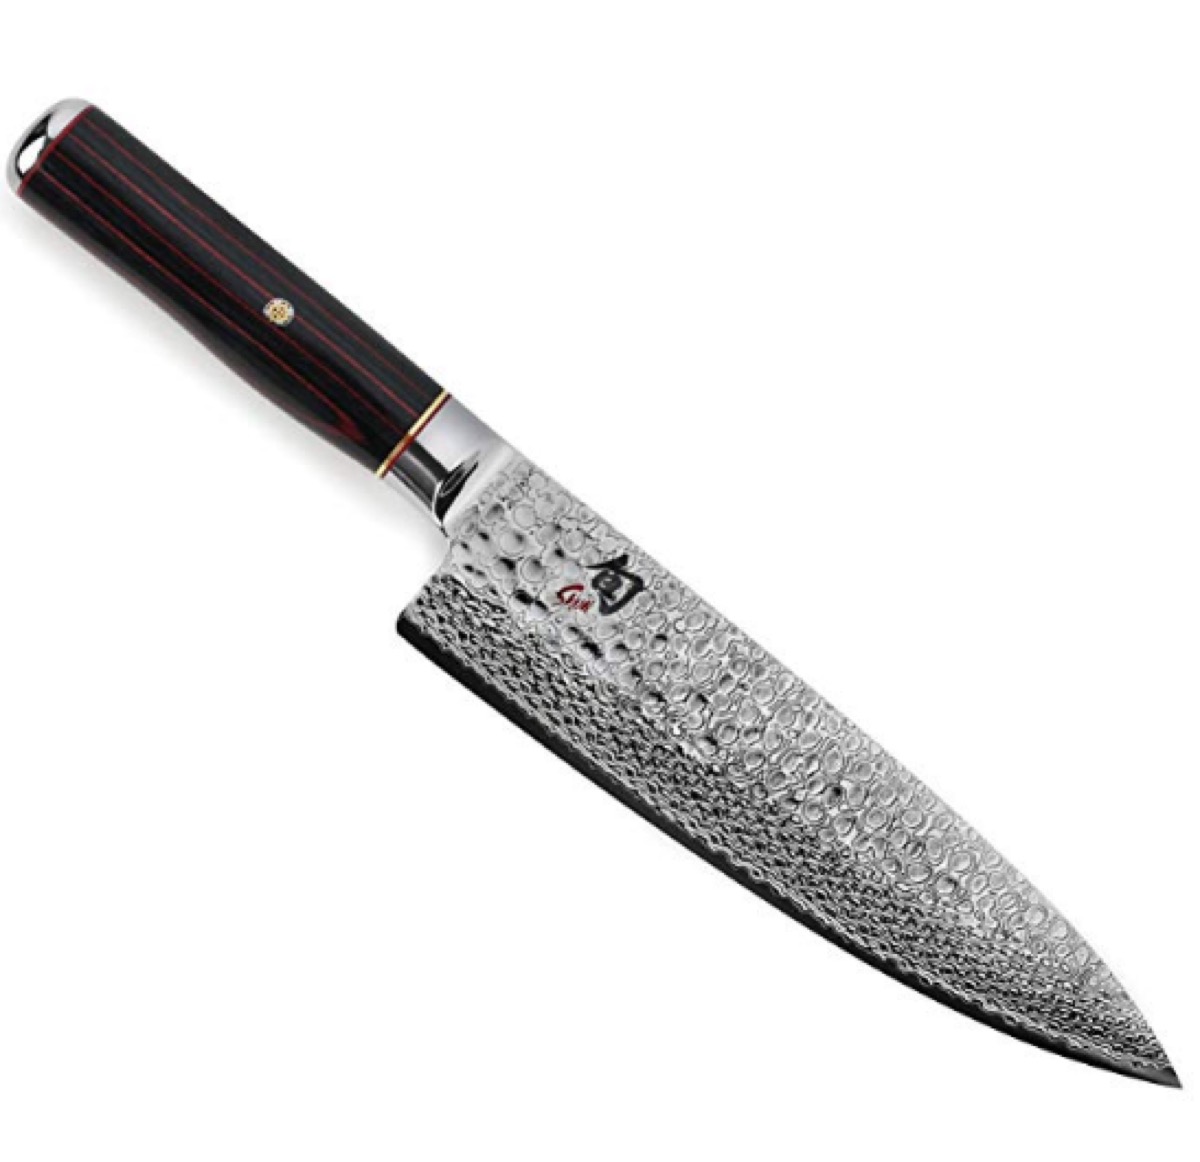 Shun Chef's Knife buy after holidays